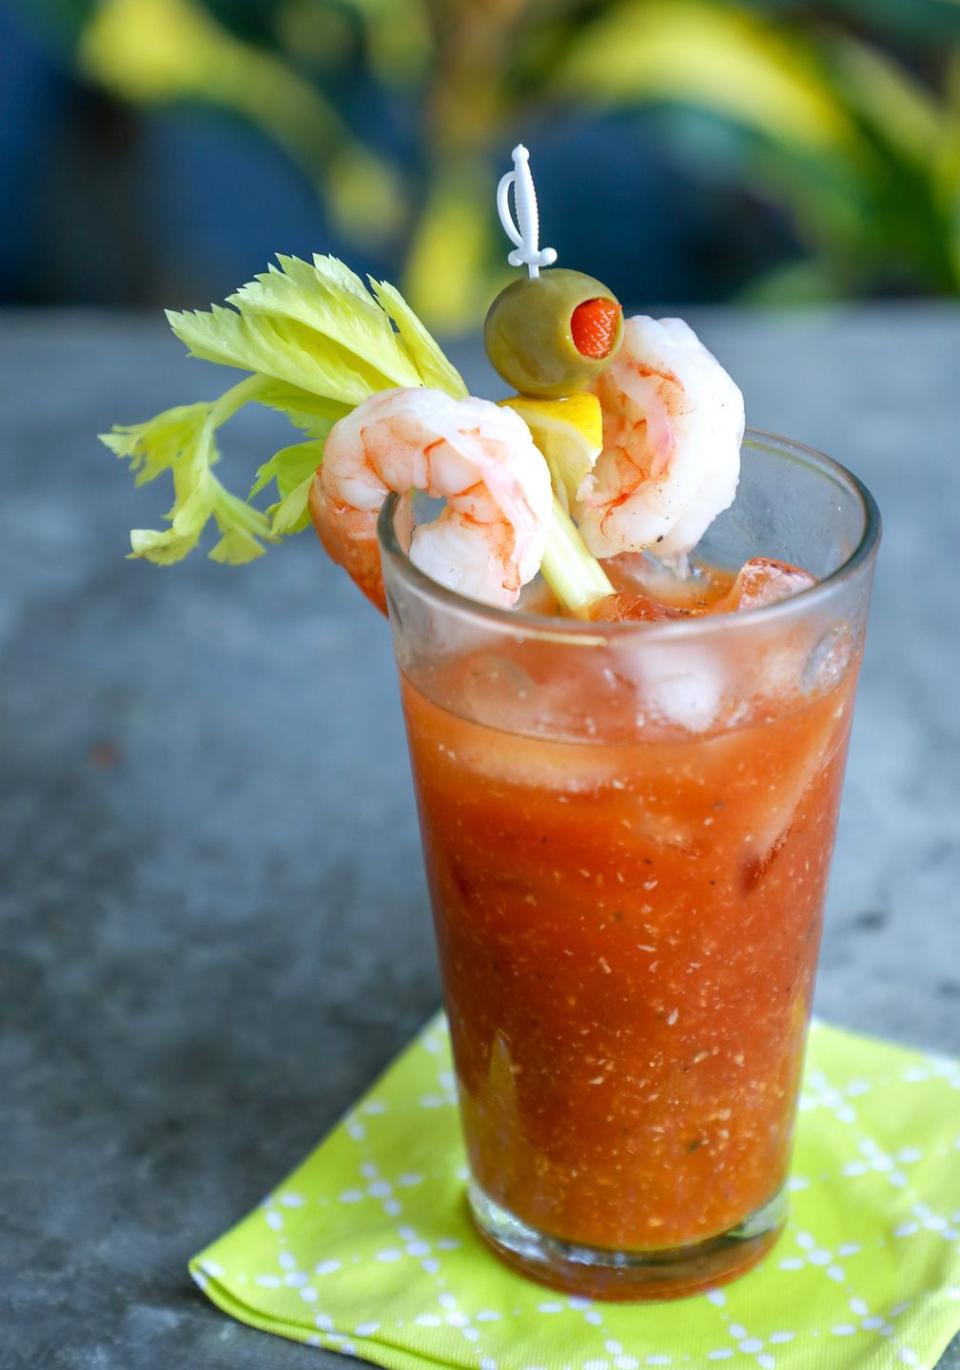 2) Bloody Mary